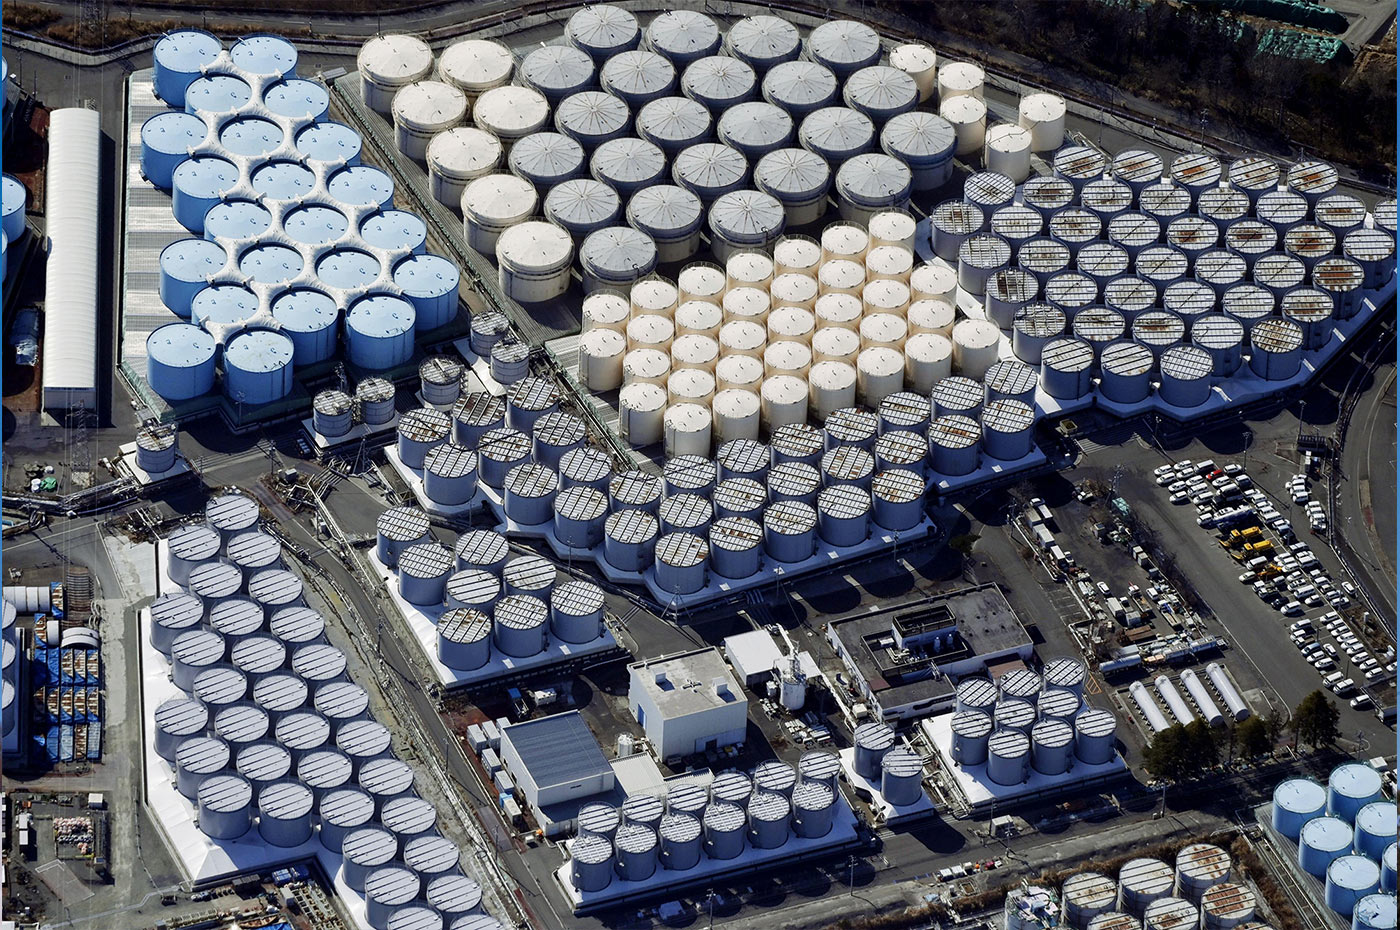 Treated water tanks lined up on the grounds of TEPCO's Fukushima Daiichi Nuclear Power Plant